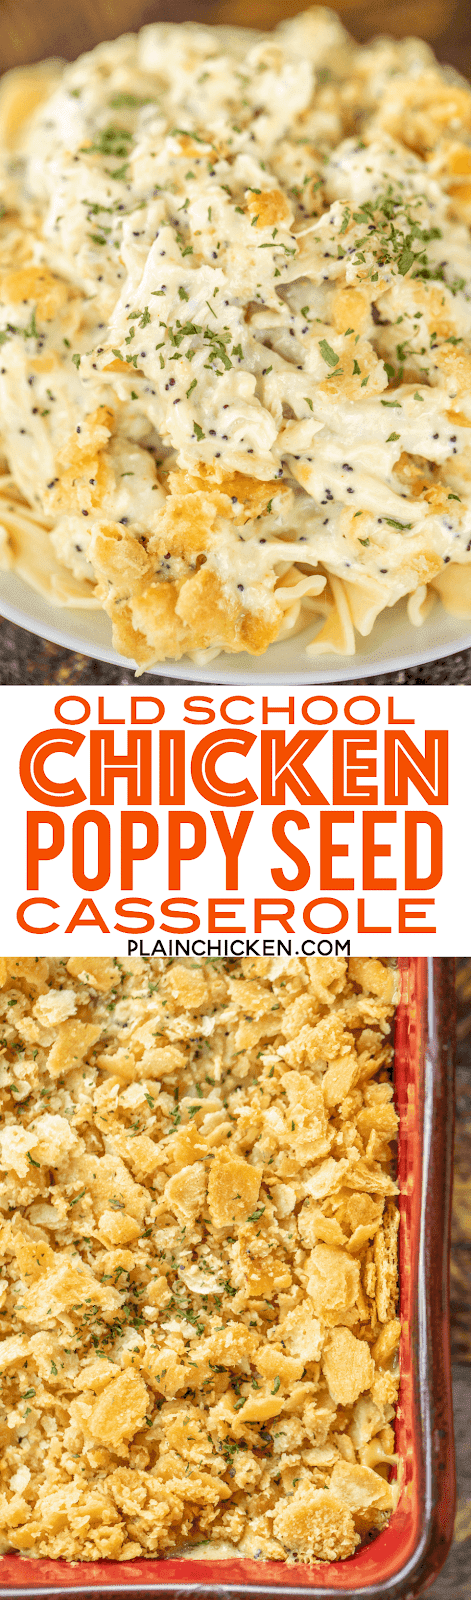 Old School Chicken Poppy Seed Casserole - a classic dish! Seriously delicious. Our whole family cleaned their plate and asked for seconds! Chicken, cream of chicken soup, sour cream, poppy seeds, Ritz cracker and butter. Great make-ahead weeknight meal! #casserole #chicken #easy